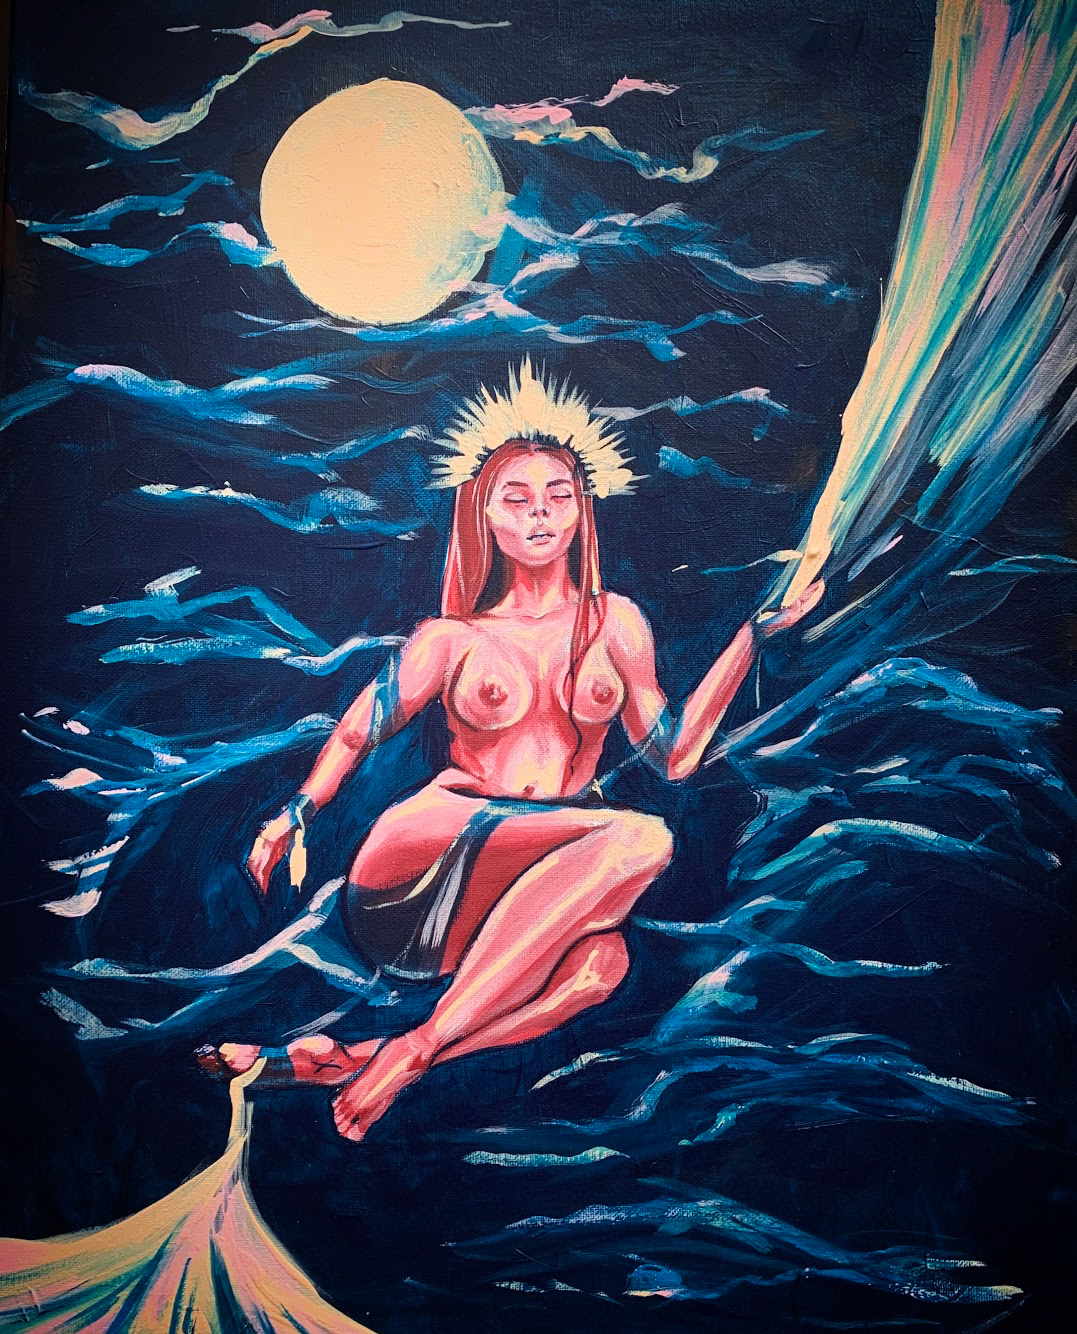 IMAGE: A nude woman wearing a crown made of radiating light lounges in the night sky below the moon, resting as if she were in a chair. Clouds drape over her legs and arms like cloth ribbons; where they end at her left arm and legs, the ribbons transform into a cascade of multicolored light.